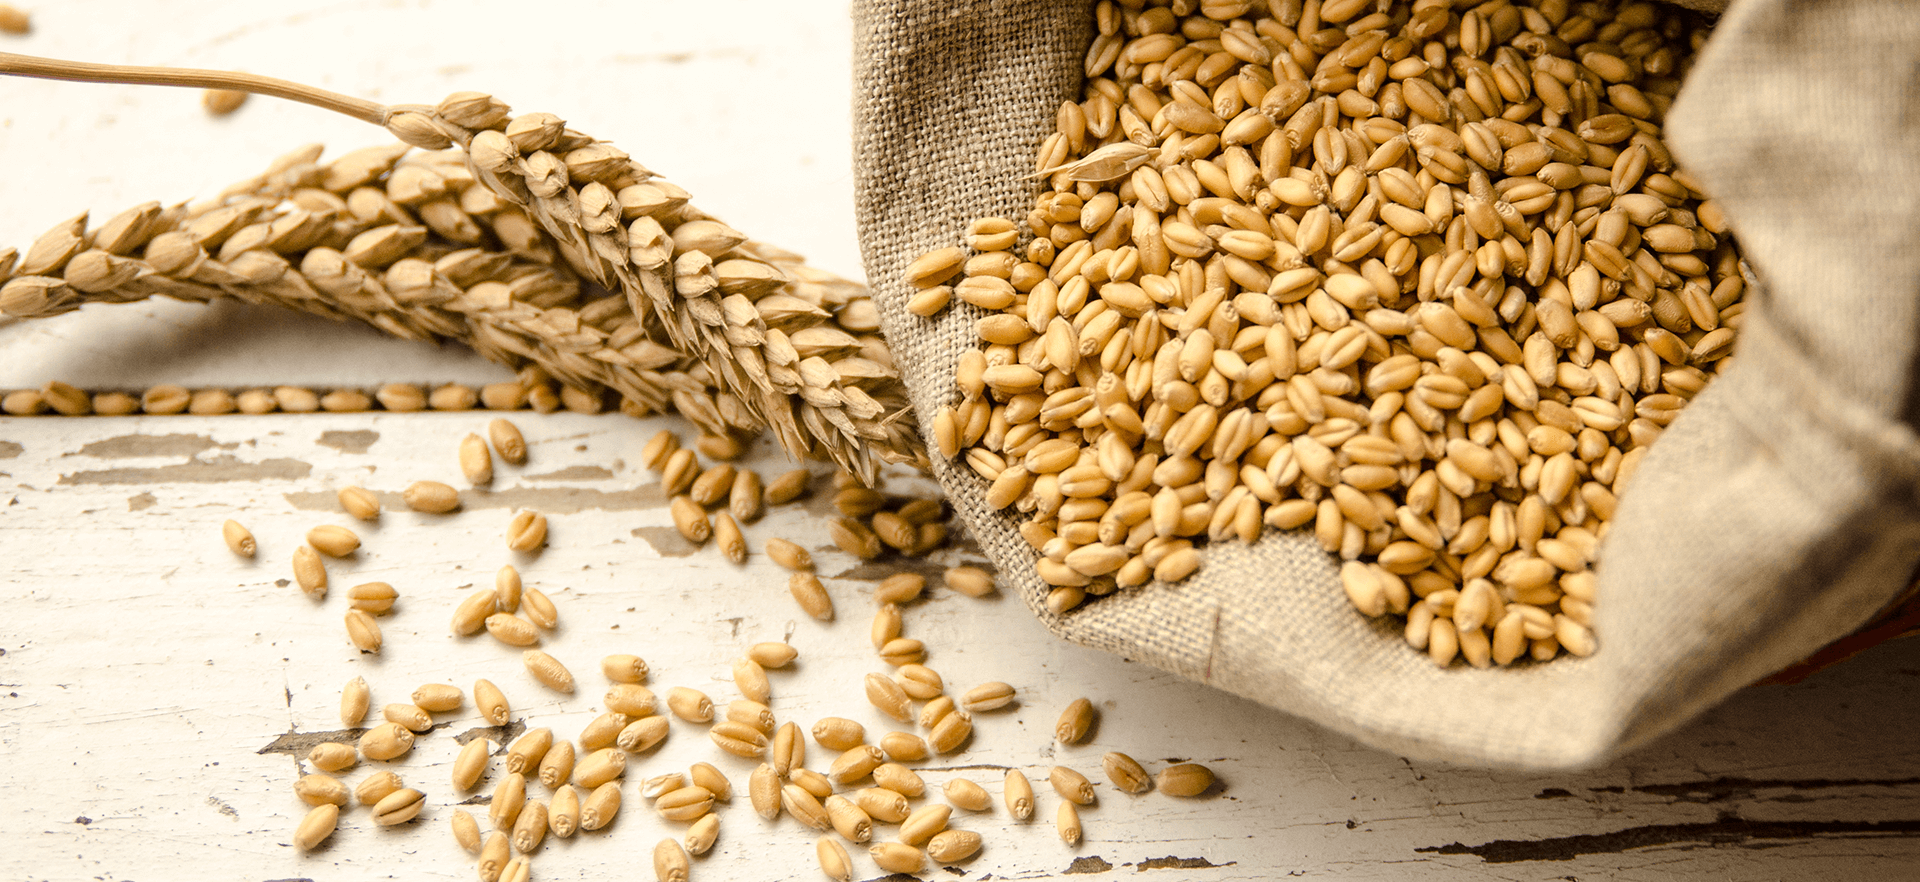 Wheat Seeds Suppliers in Ahmedabad, Gujarat, India